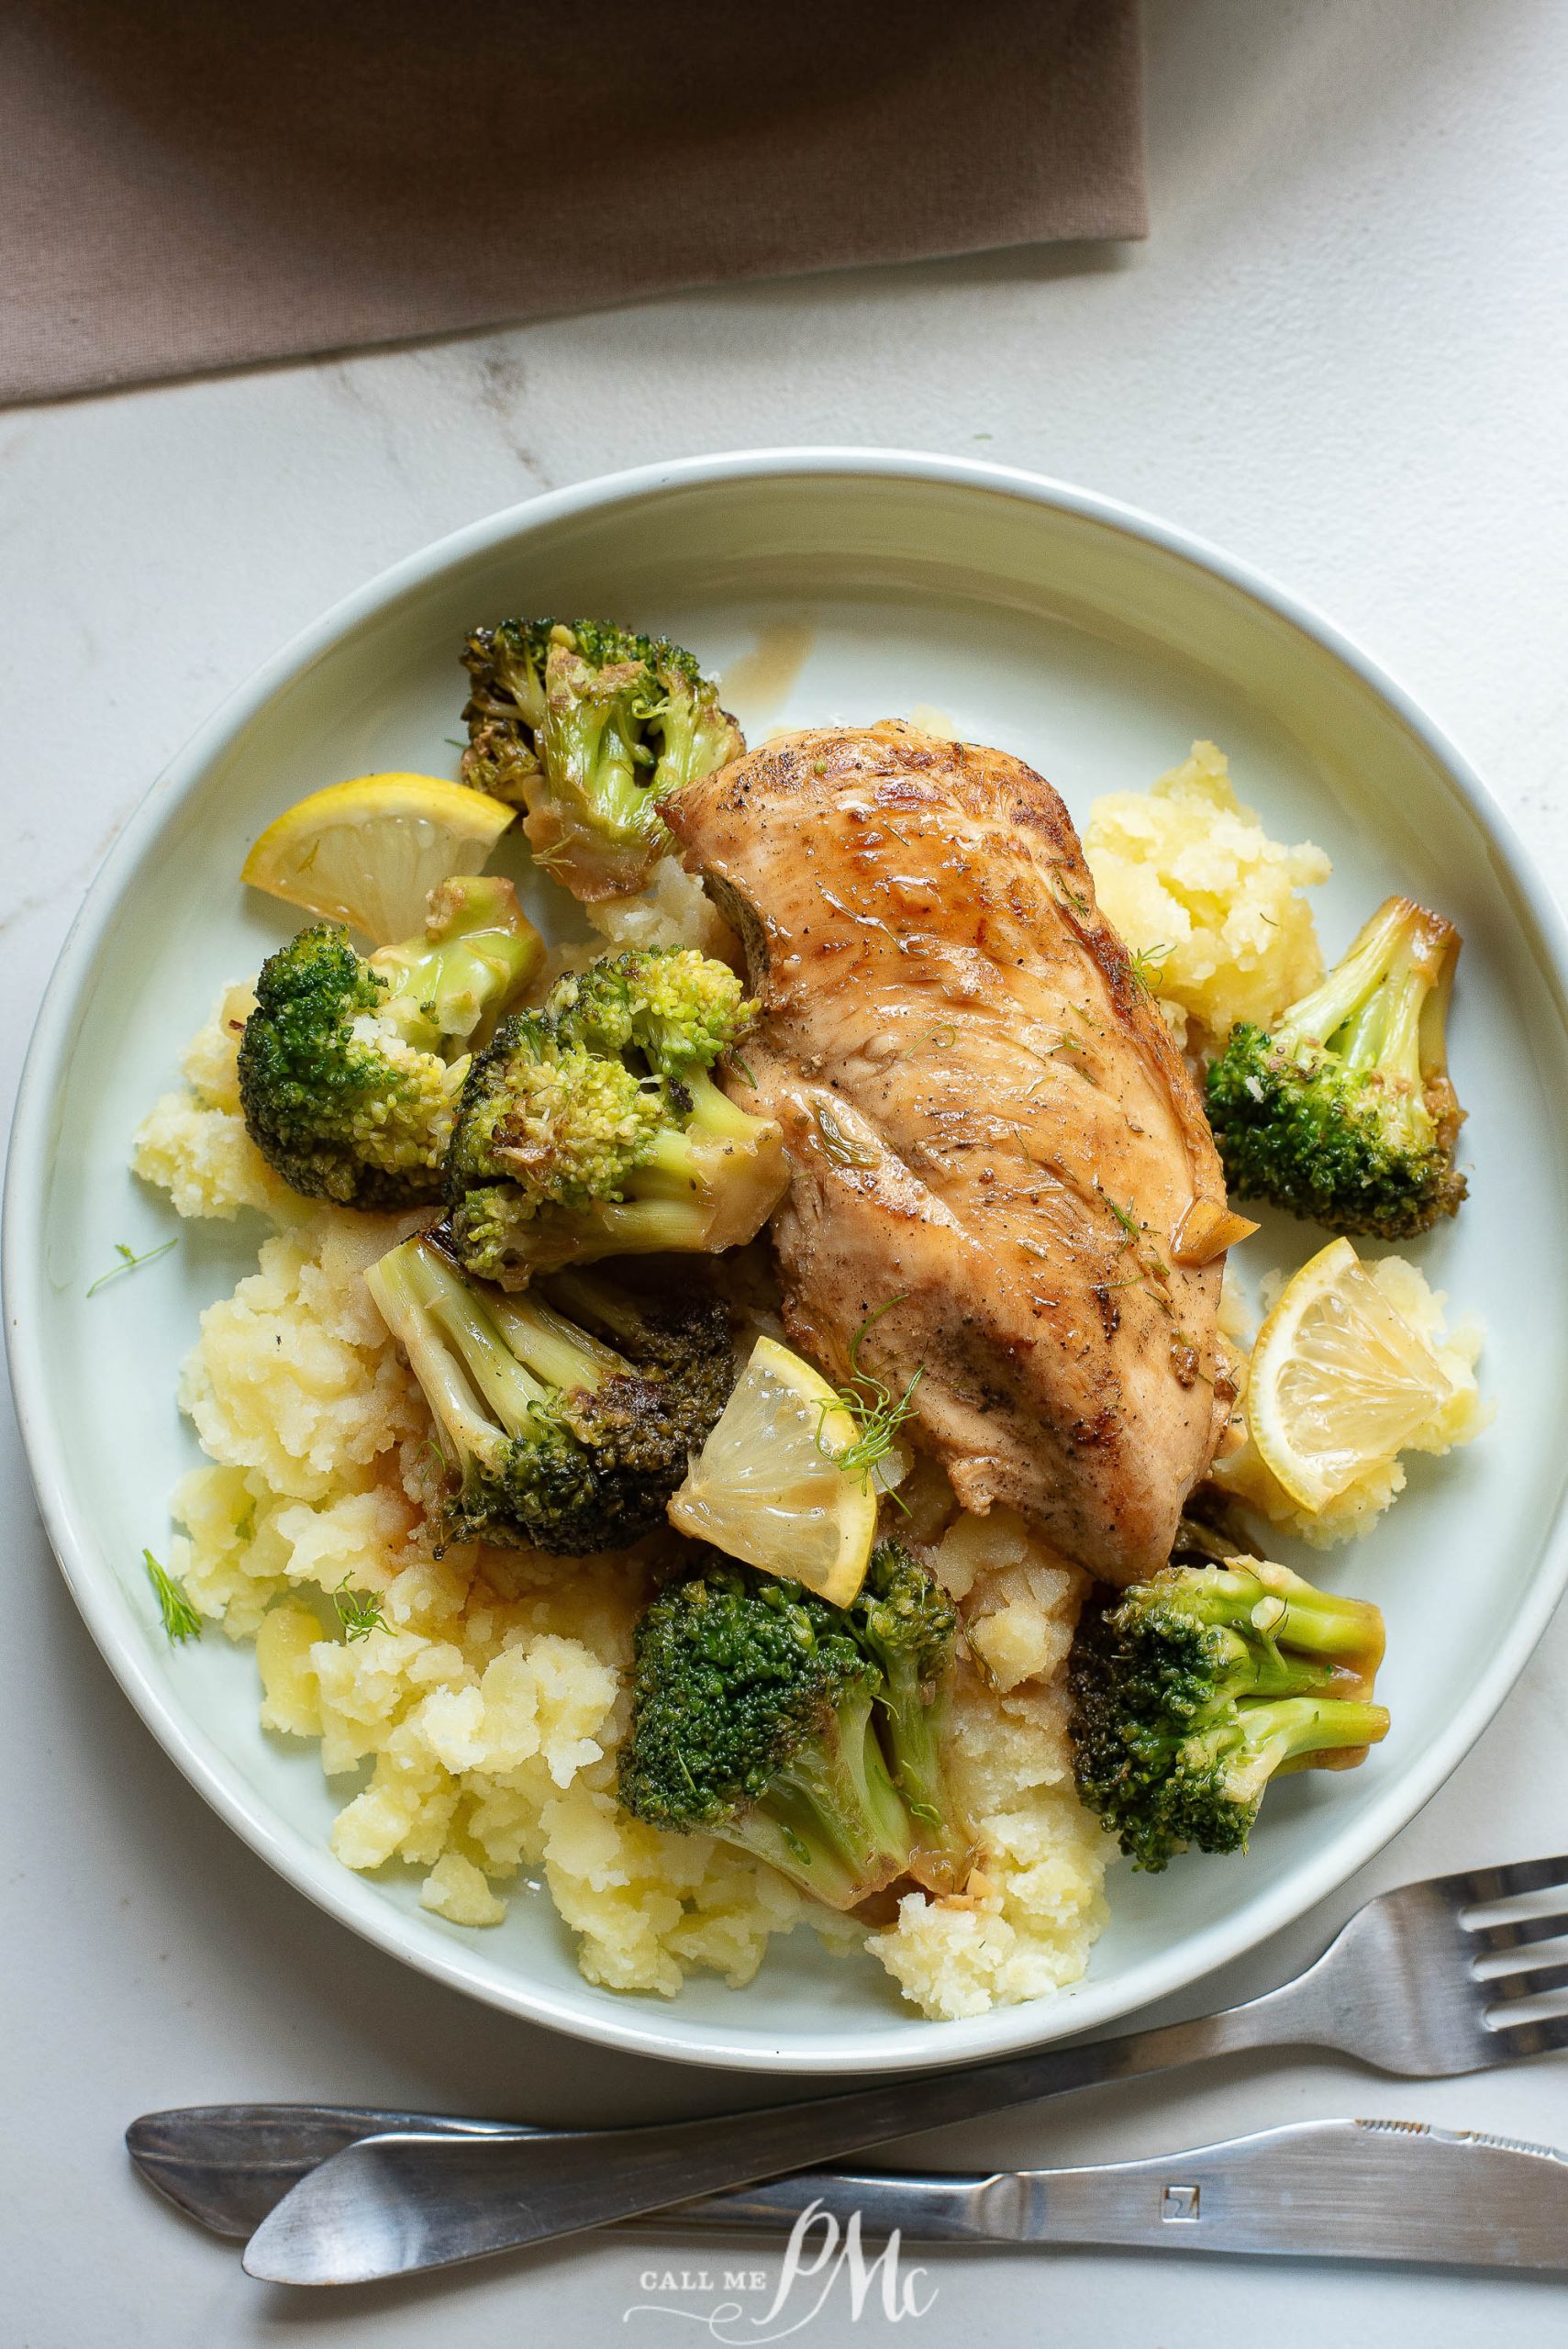 Grilled chicken breast served with broccoli and mashed potatoes on a plate.